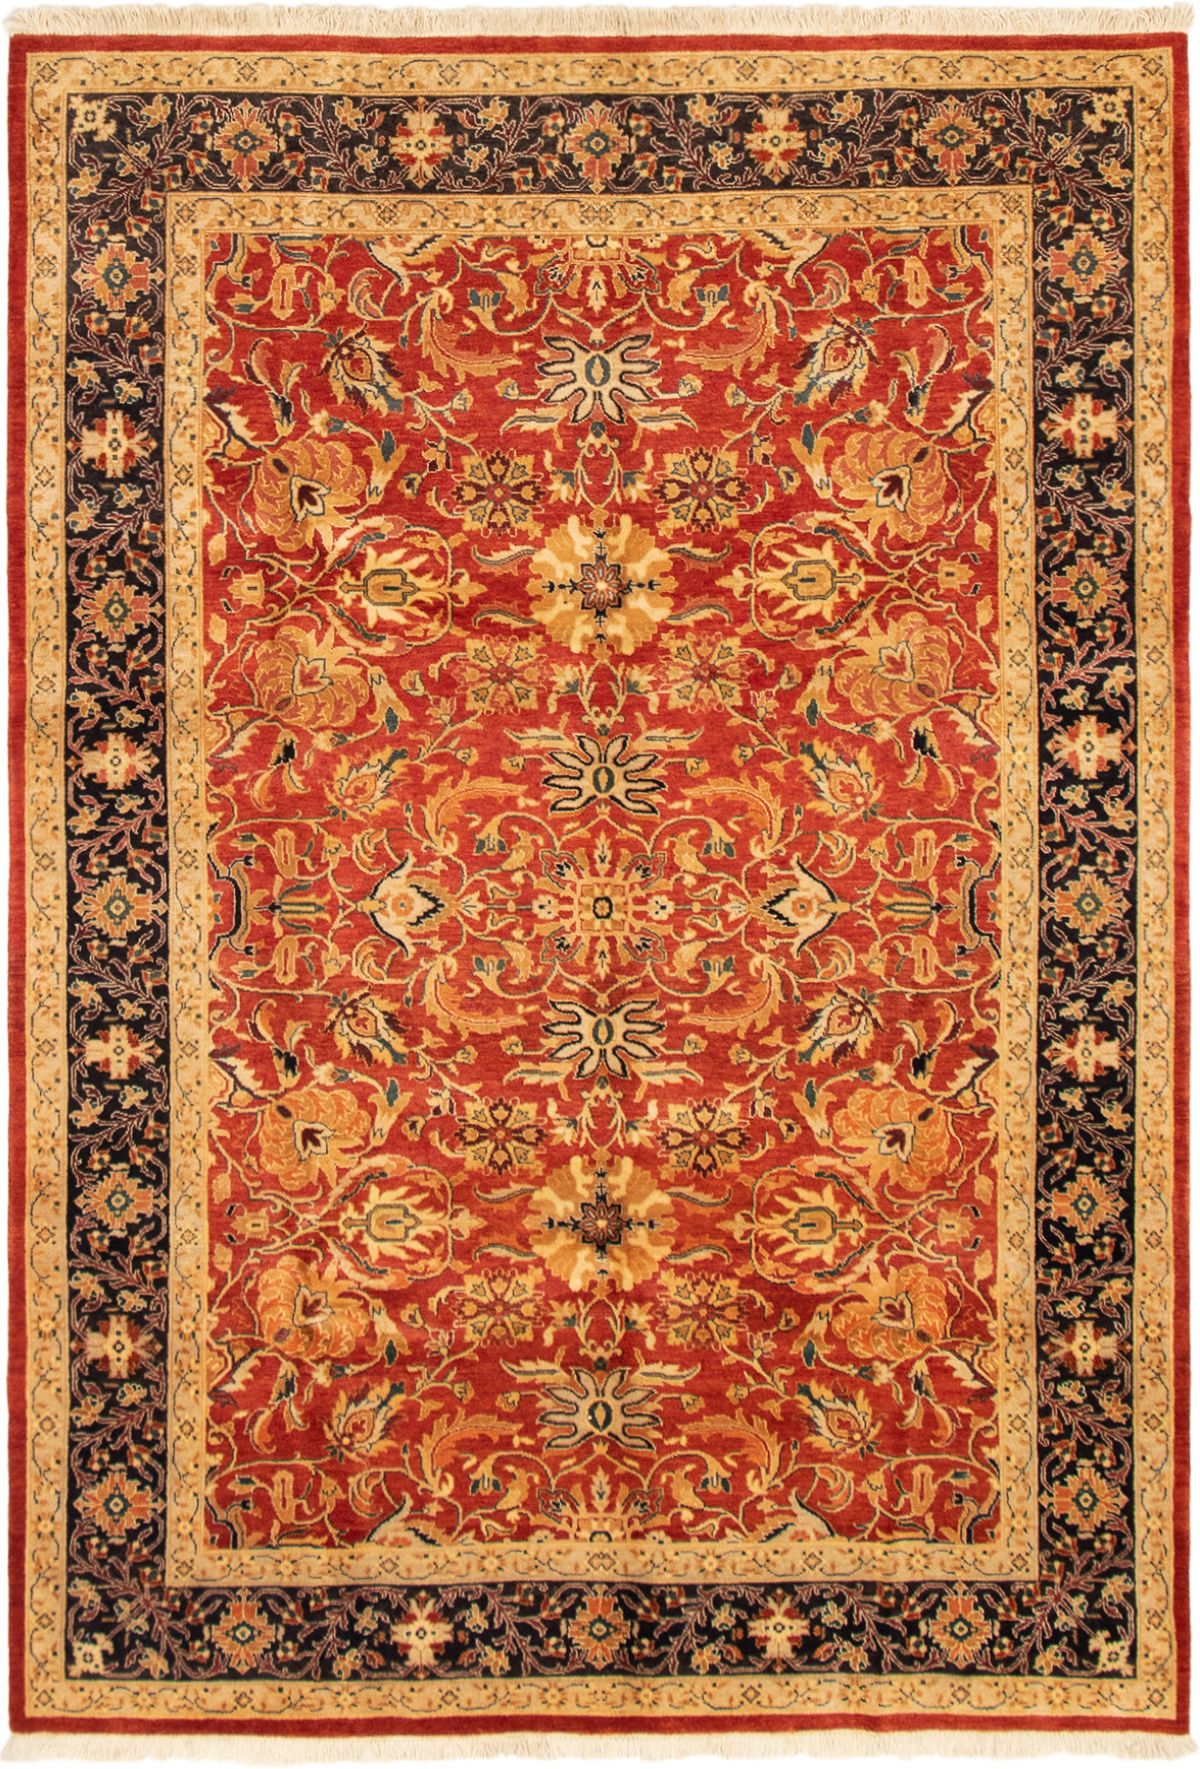 Finest Khal Mohammadi Bordered Red Rug 4'1 x 6'4 Bedroom Hand-Knotted Wool Rug eCarpet Gallery Area Rug for Living Room 357264 